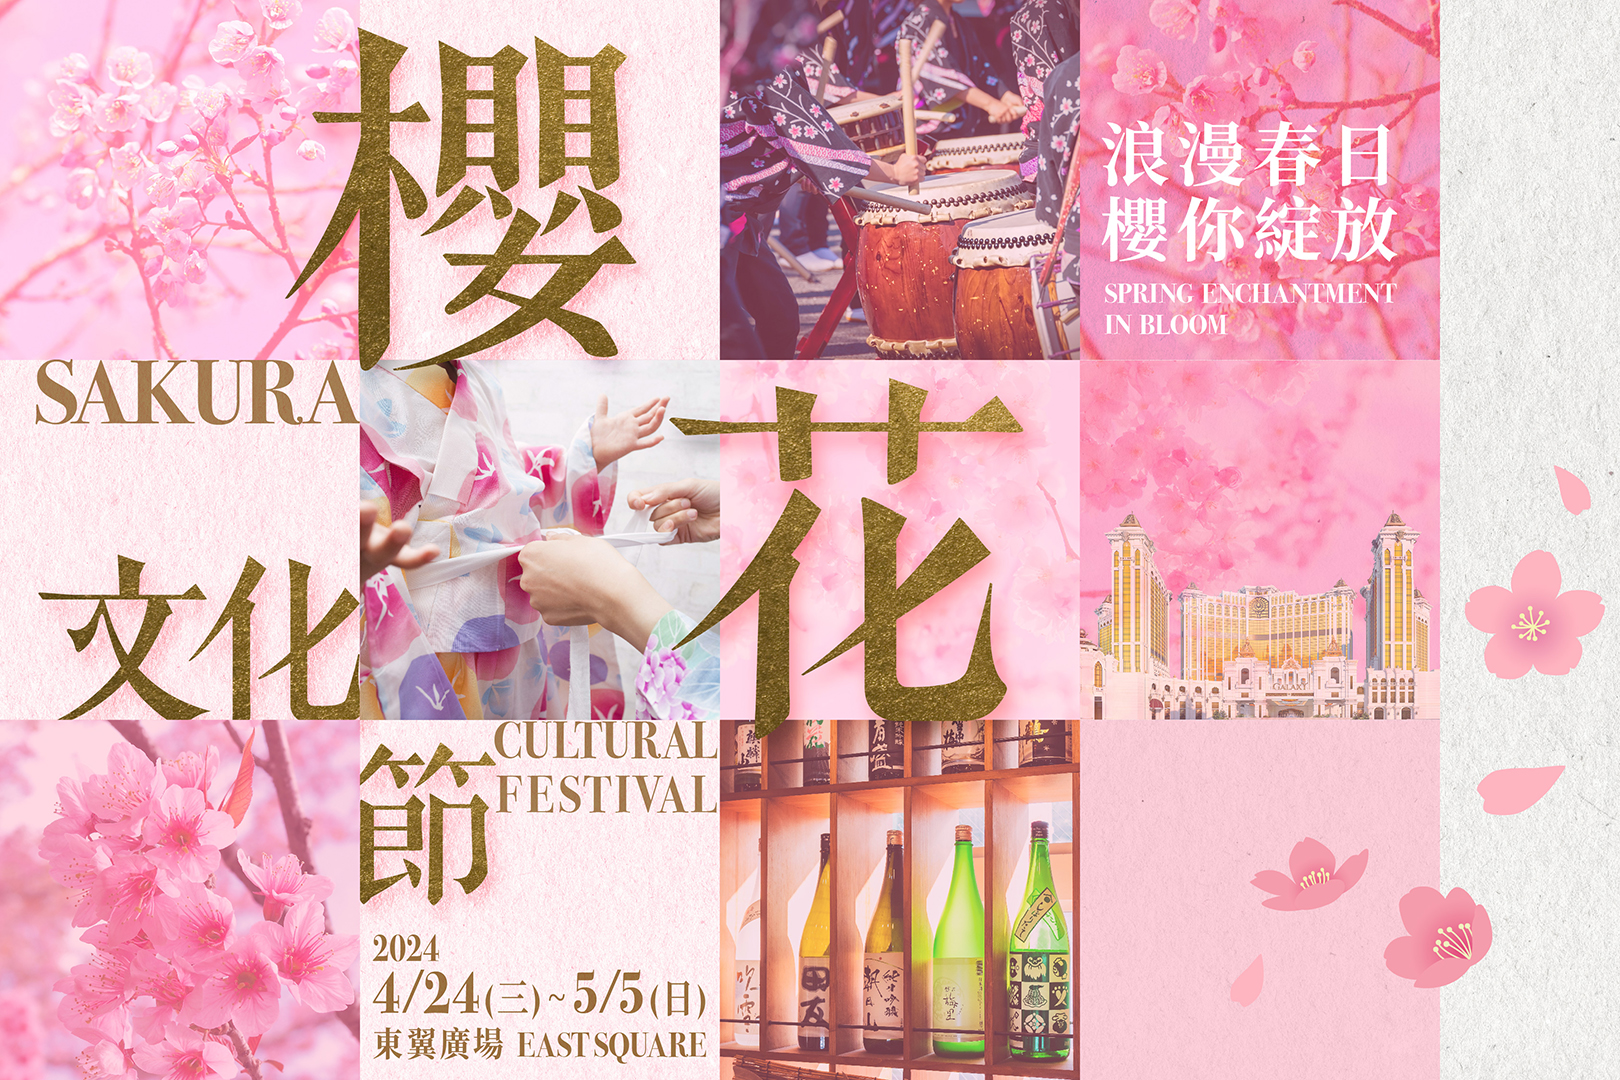 Galaxy Macau is unveiling the Sakura Cultural Festival, creating a golden week hotspot brimming with Japanese charm.